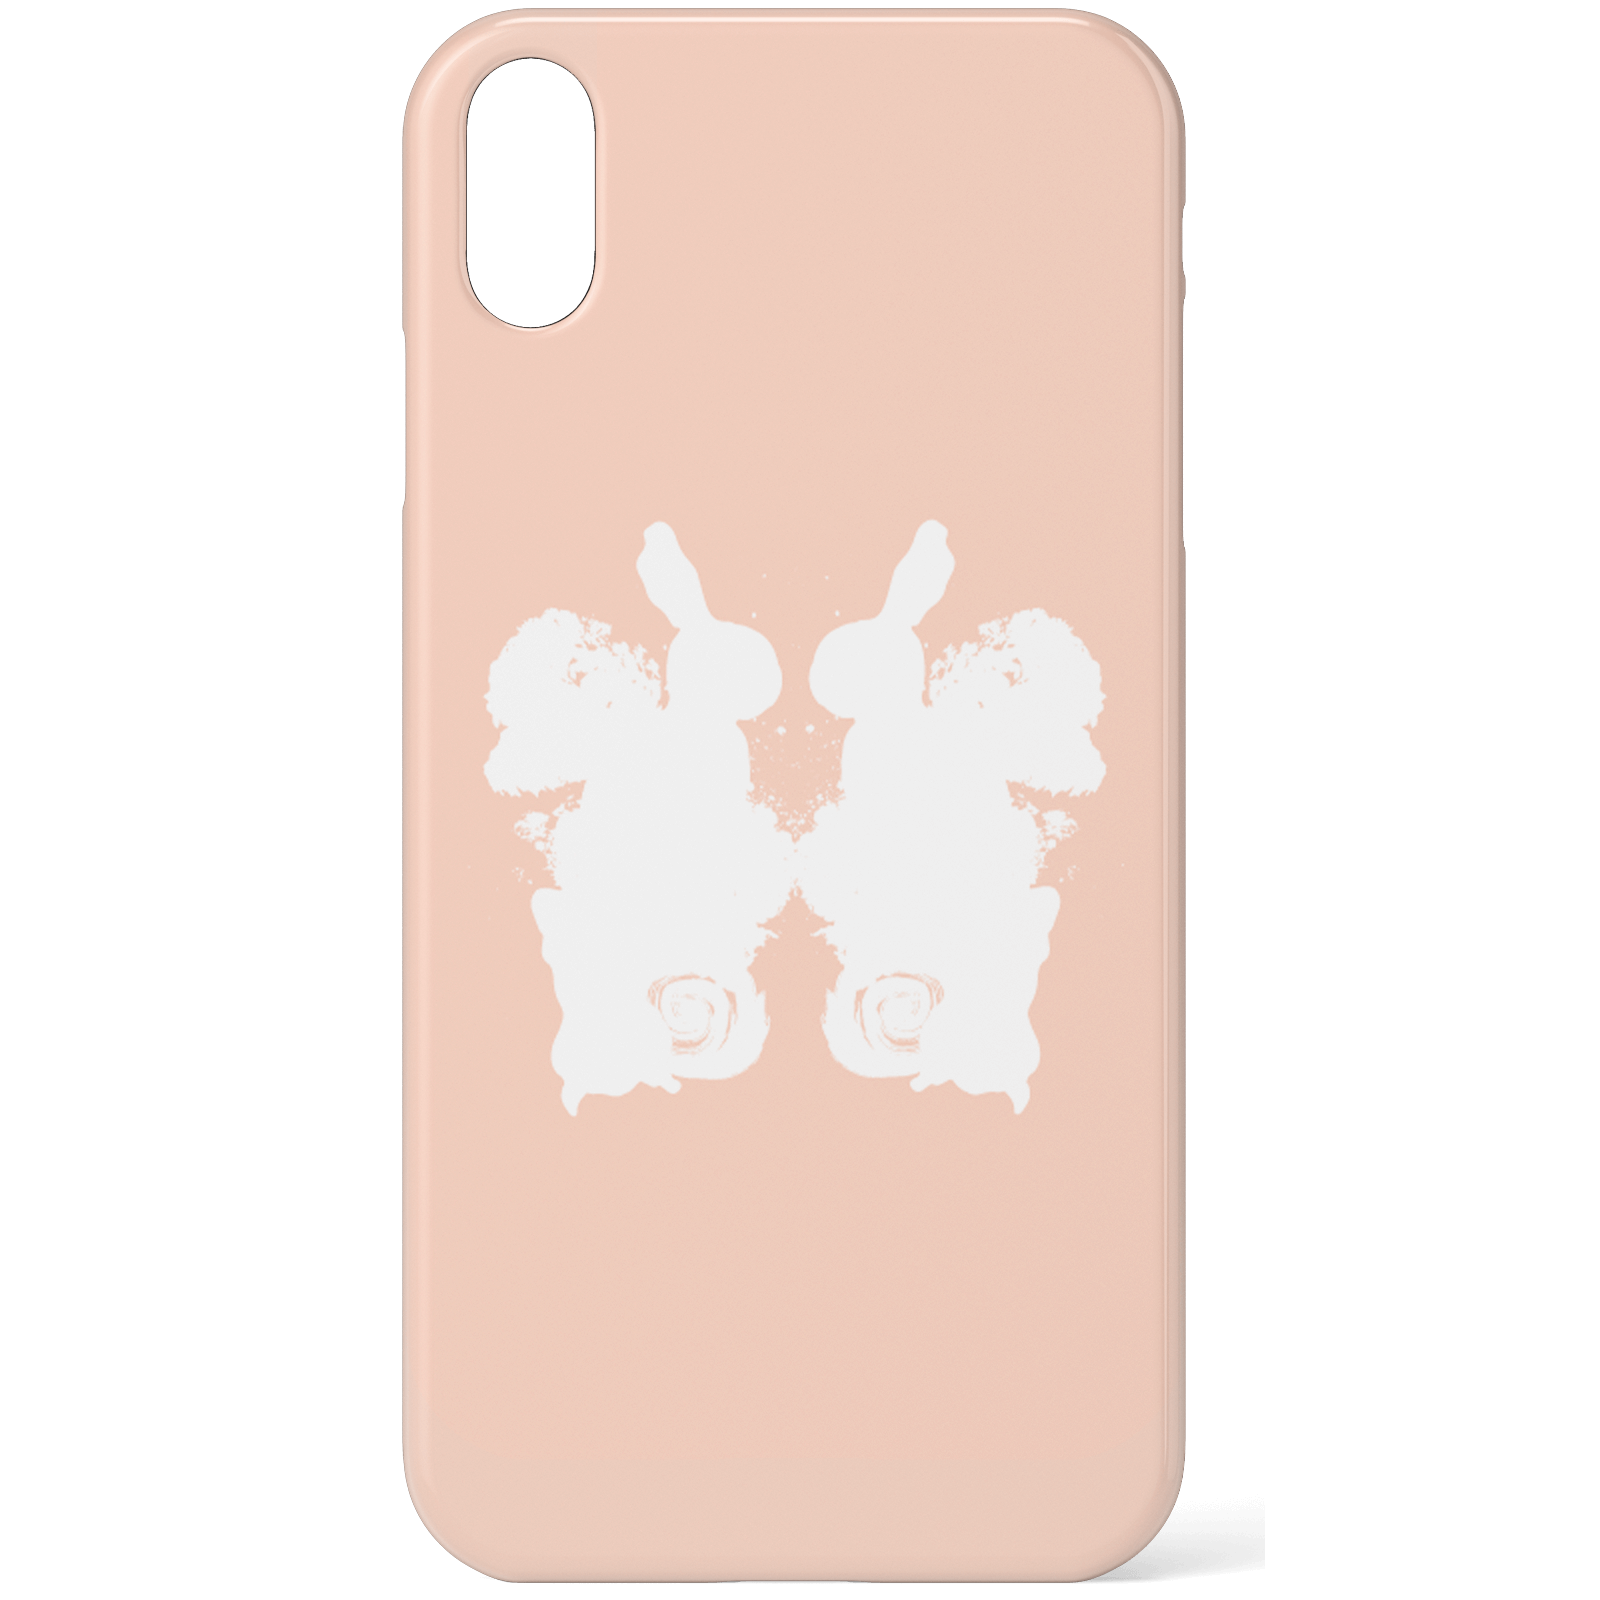 Rorschach Inkblot Pink Phone Case for iPhone and Android - iPhone 5/5s - Snap Case - Matte